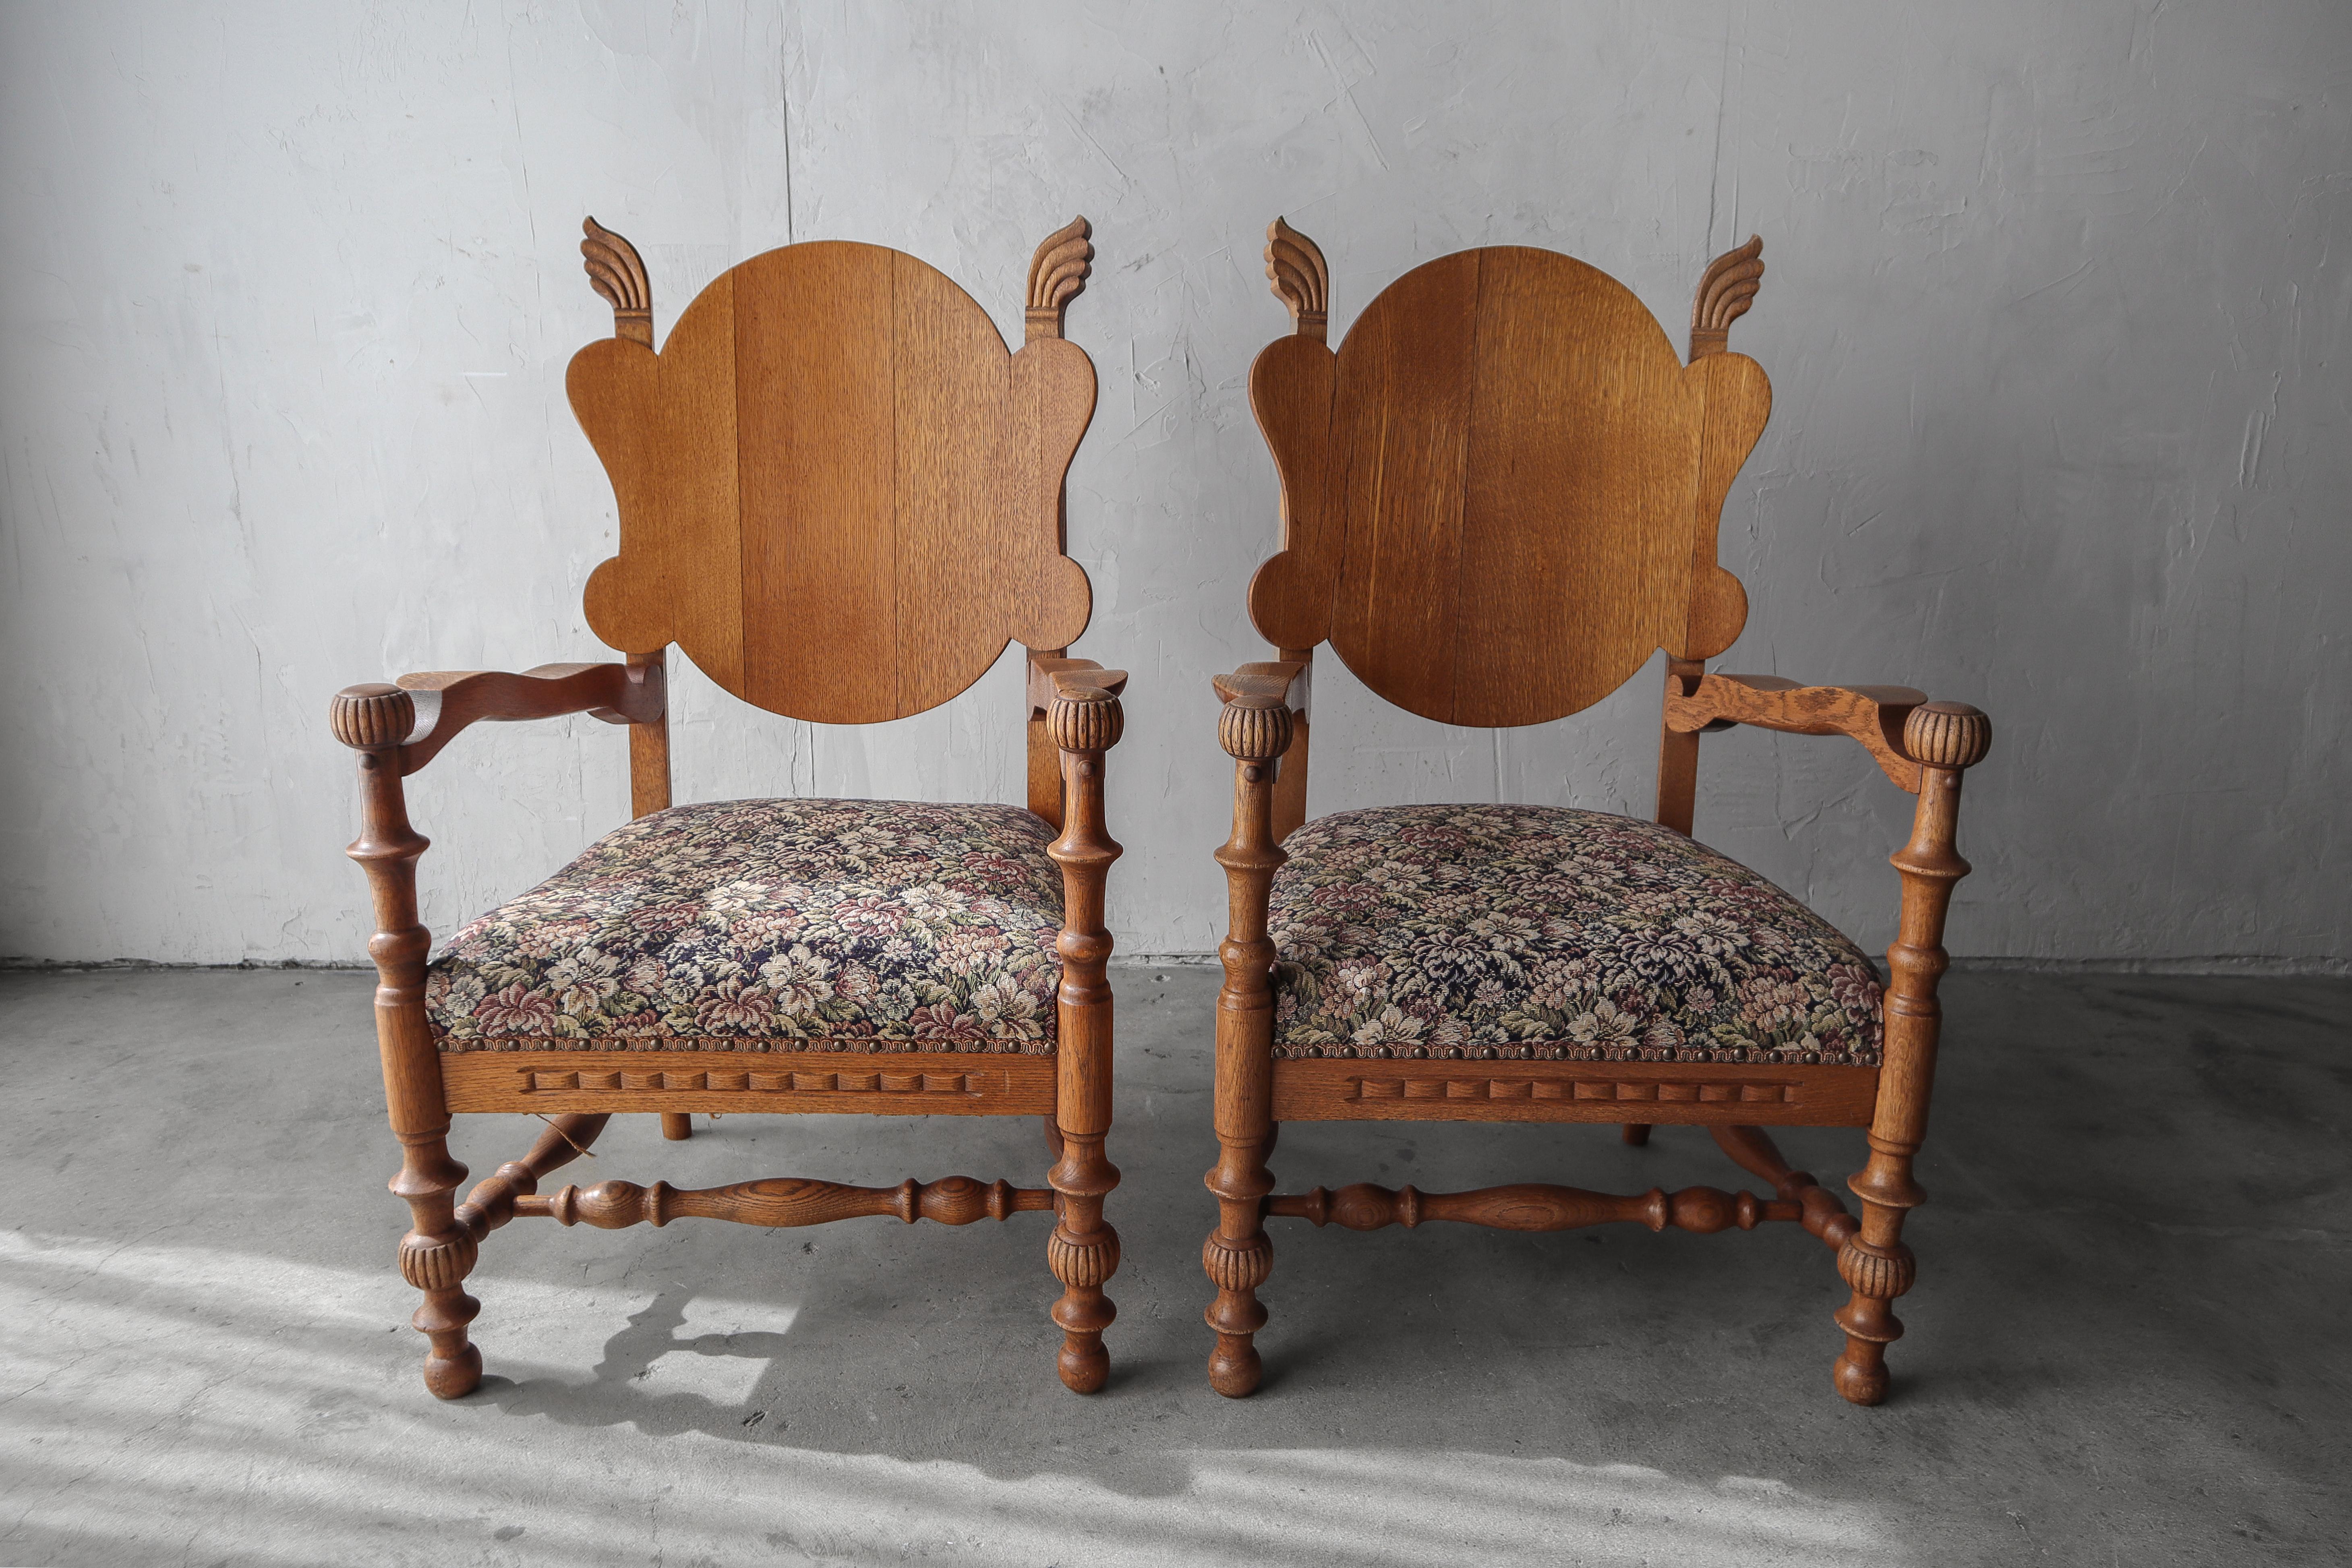 Incredible example of antique carved oak lounge chairs.  These chairs have gorgeous carved details, bent oak-ply backs and all original floral tapestry seats.  These are the epitome of antique seating in my opinion.  Their details are